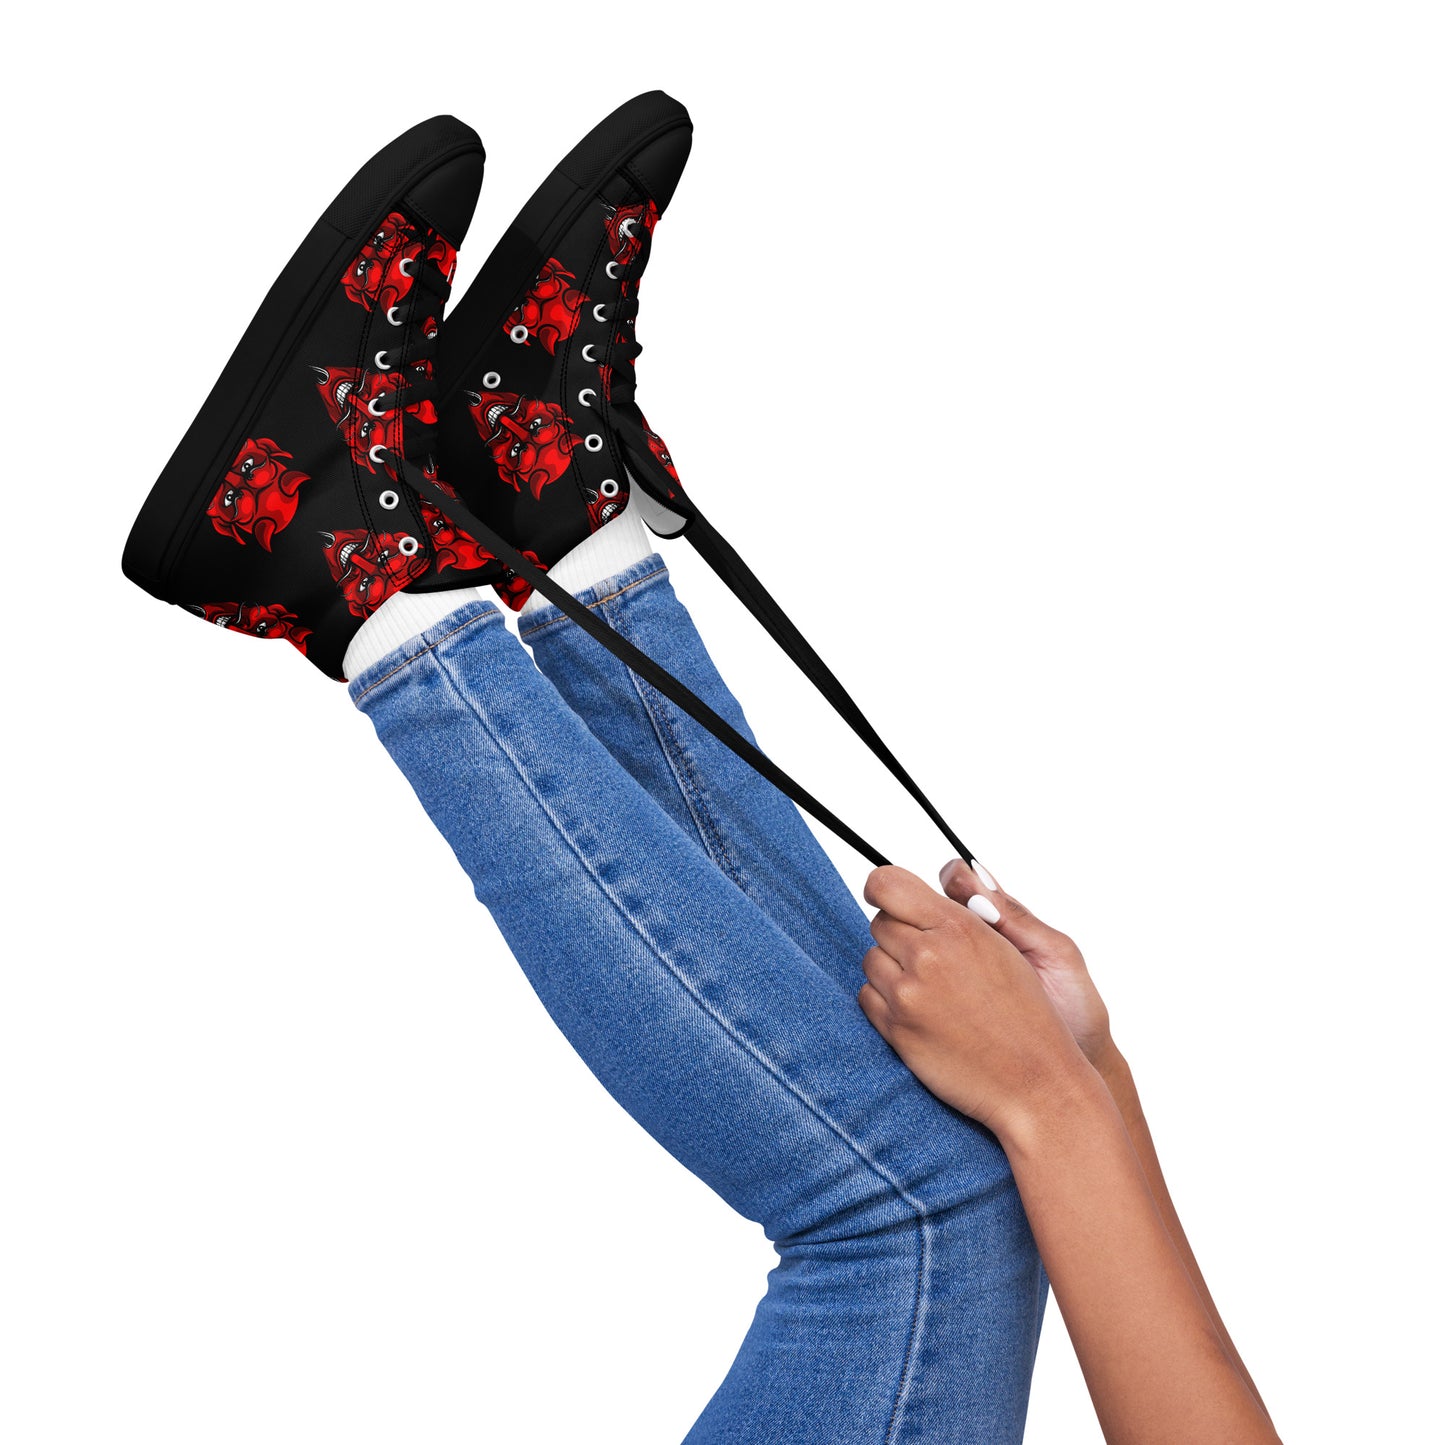 WOMEN'S RED DEVIL HIGH TOP CANVAS SHOES